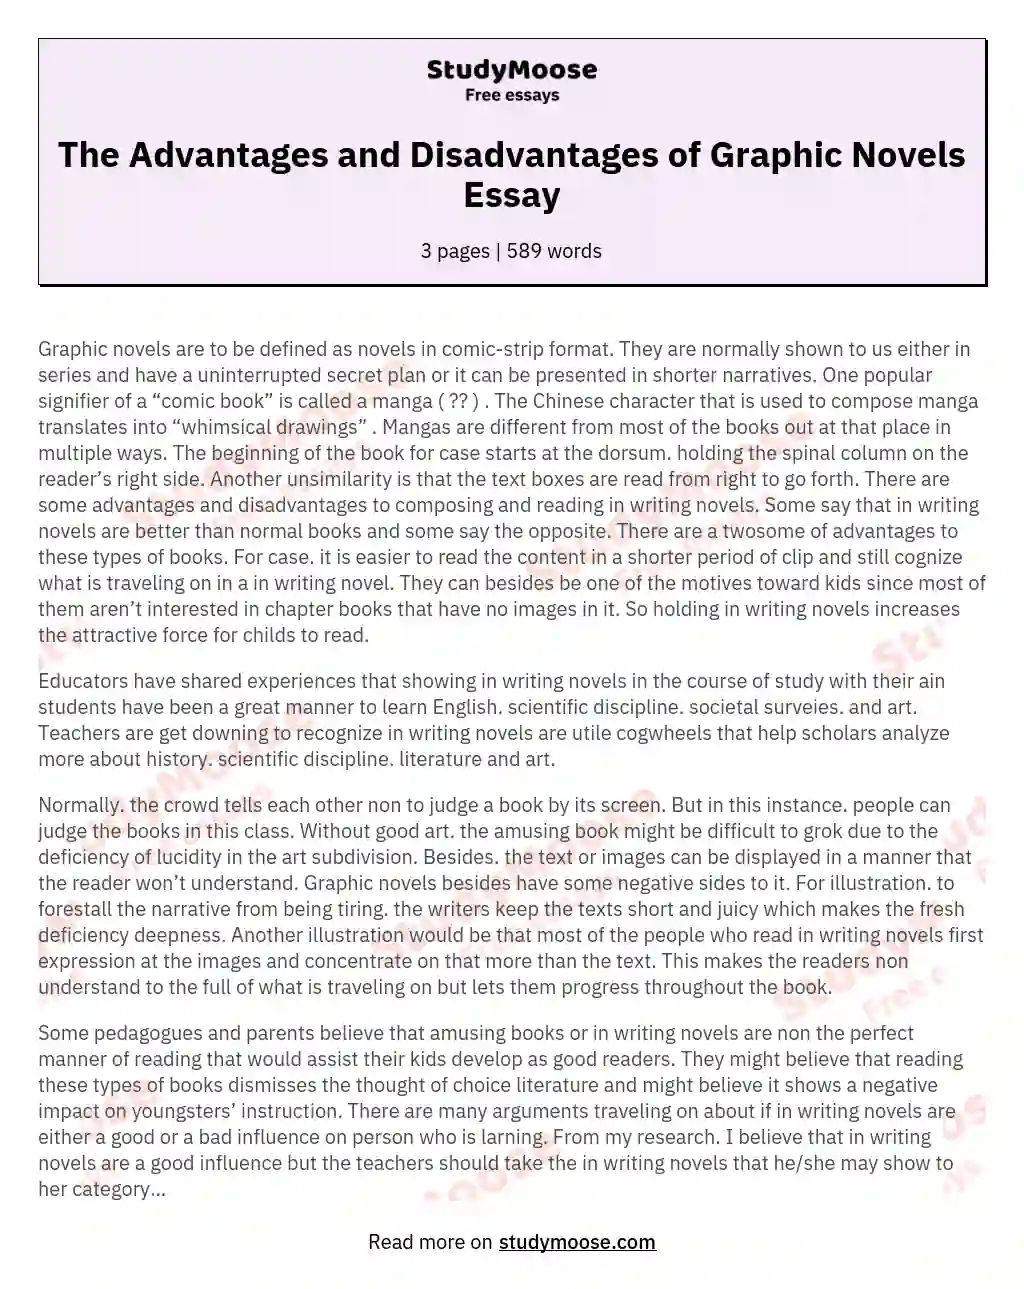 The Advantages and Disadvantages of Graphic Novels Essay